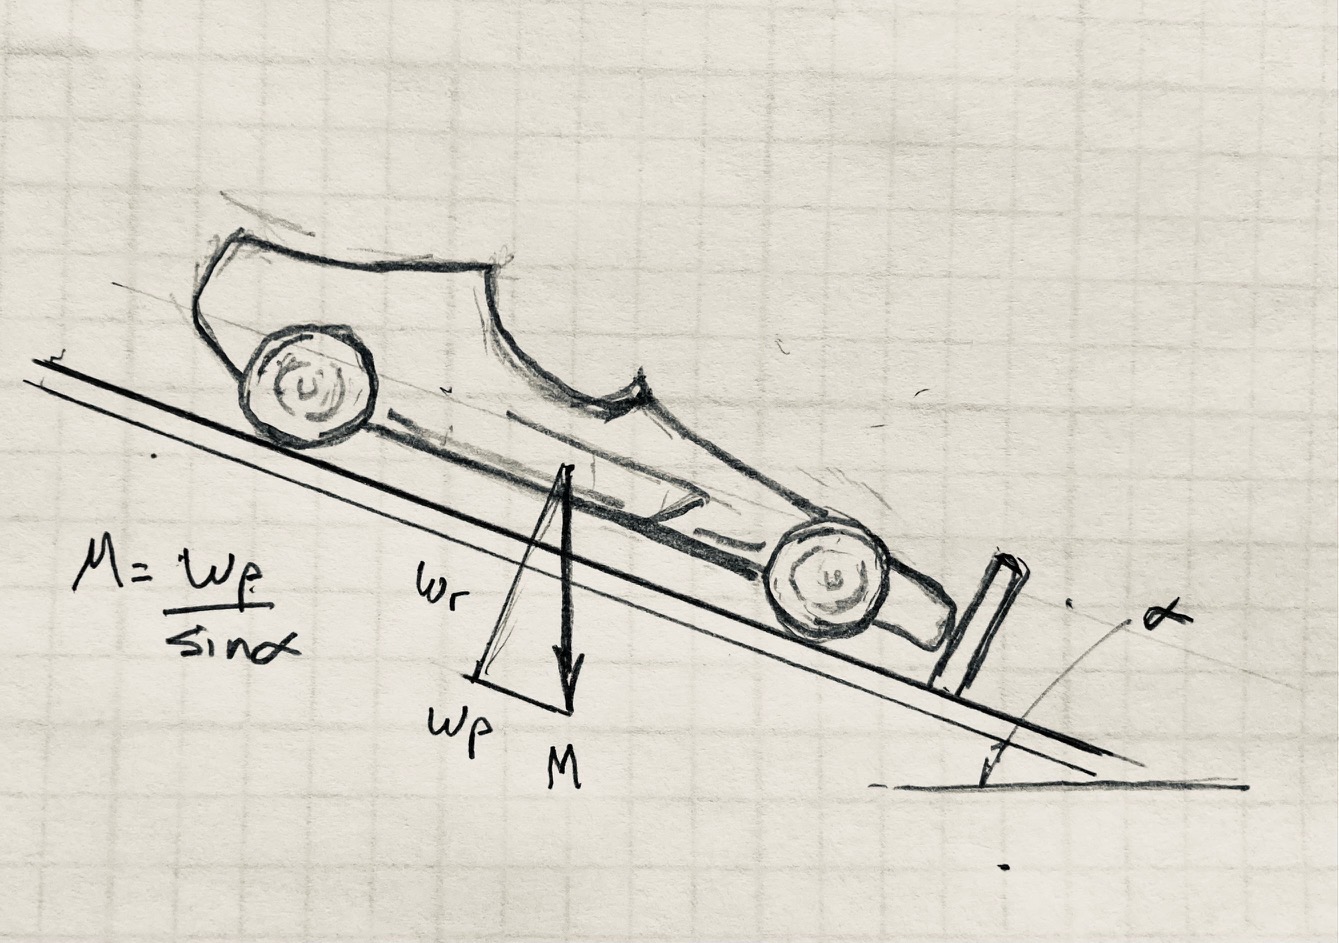 Diagram of weight vectors of car on ramp